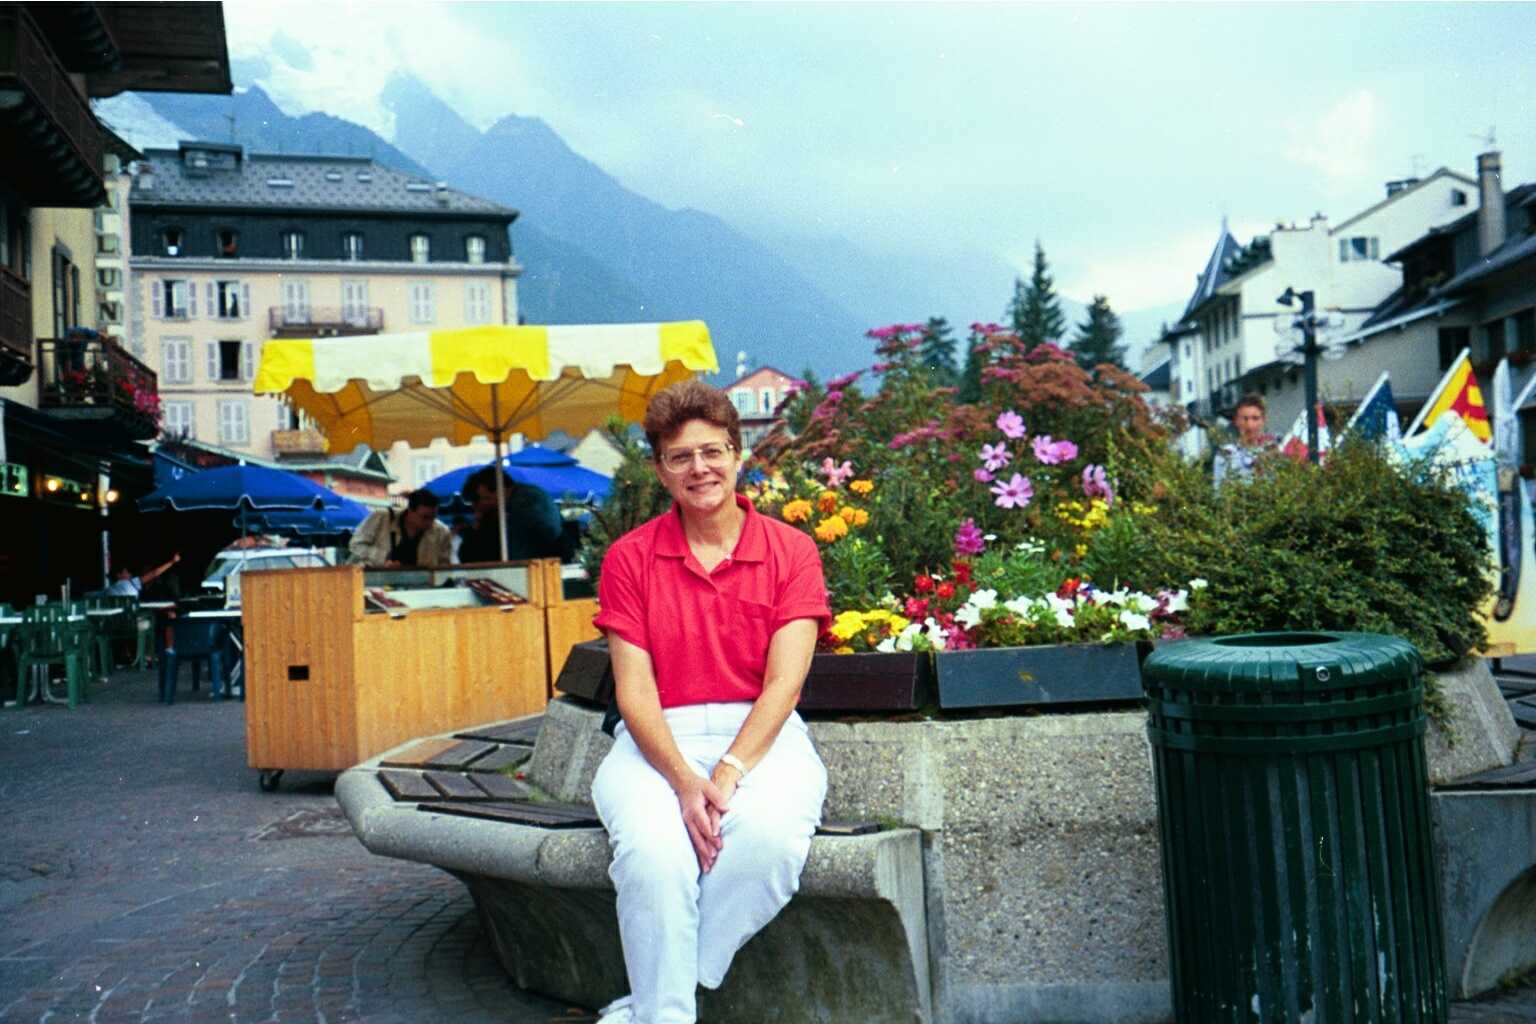 A tranquil moment in Chamonix, on our honeymoon, August, 1999